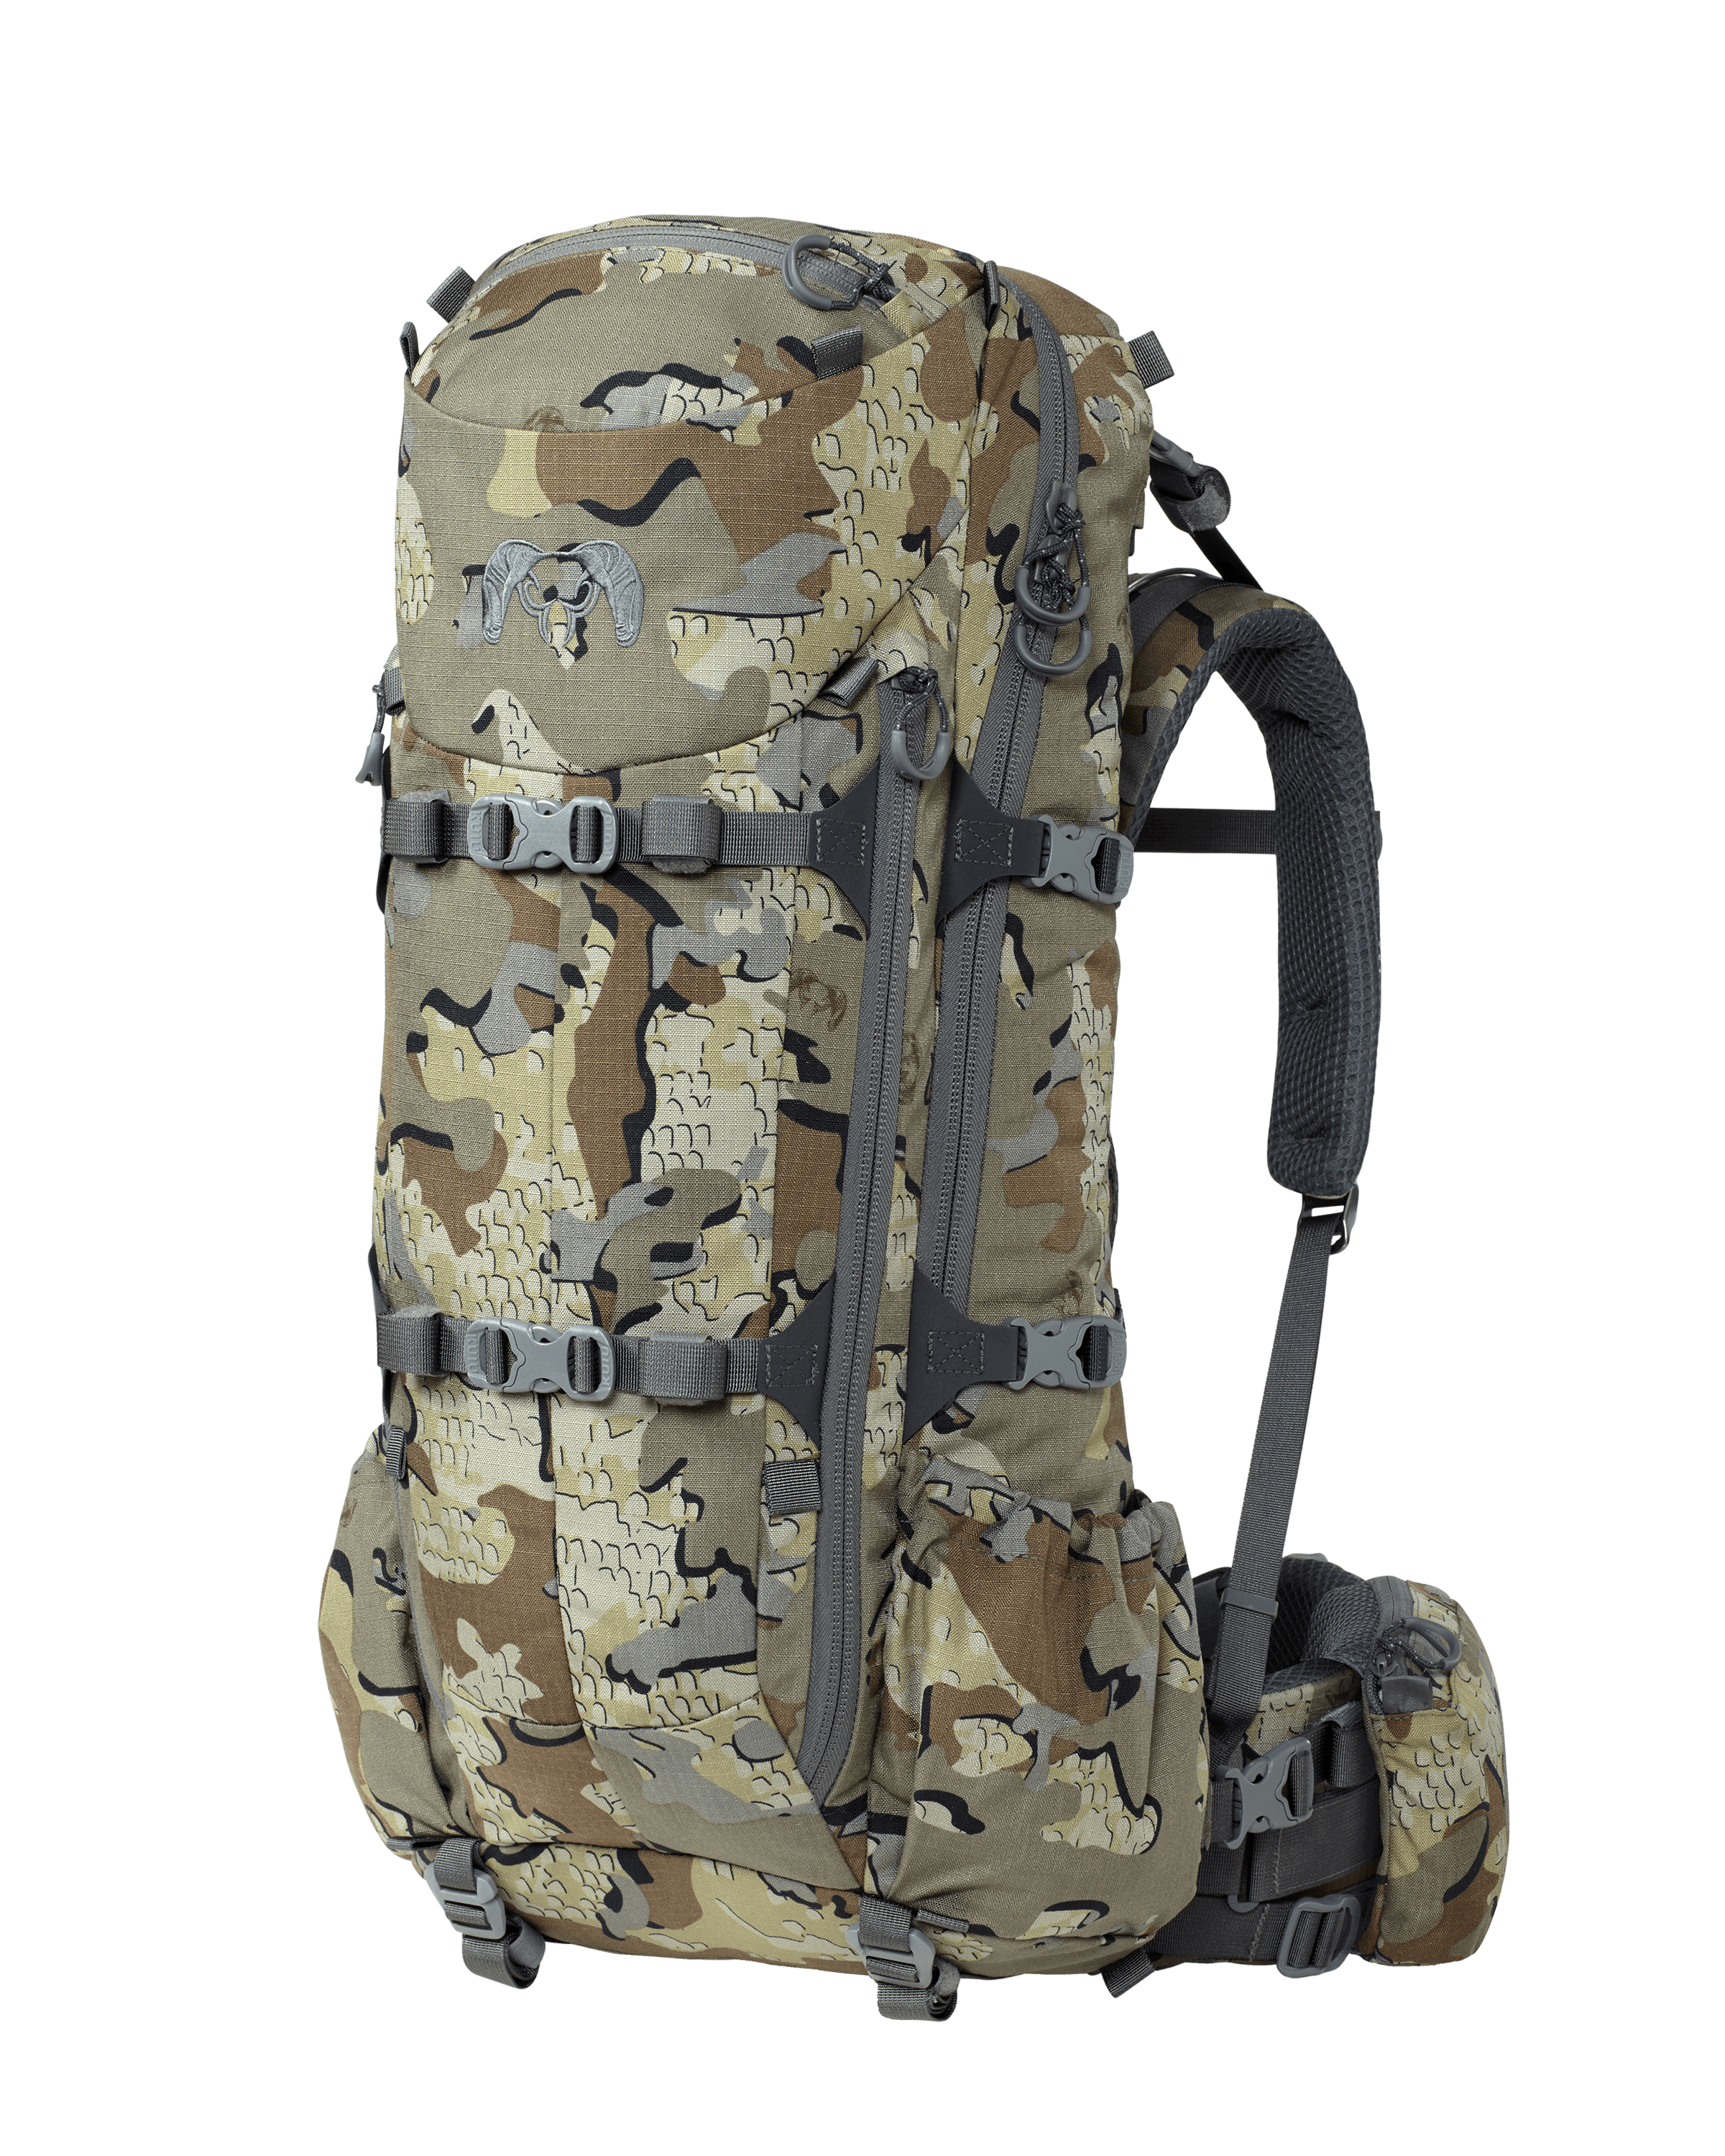 KUIU Women's PRO 2300 Pack in Valo